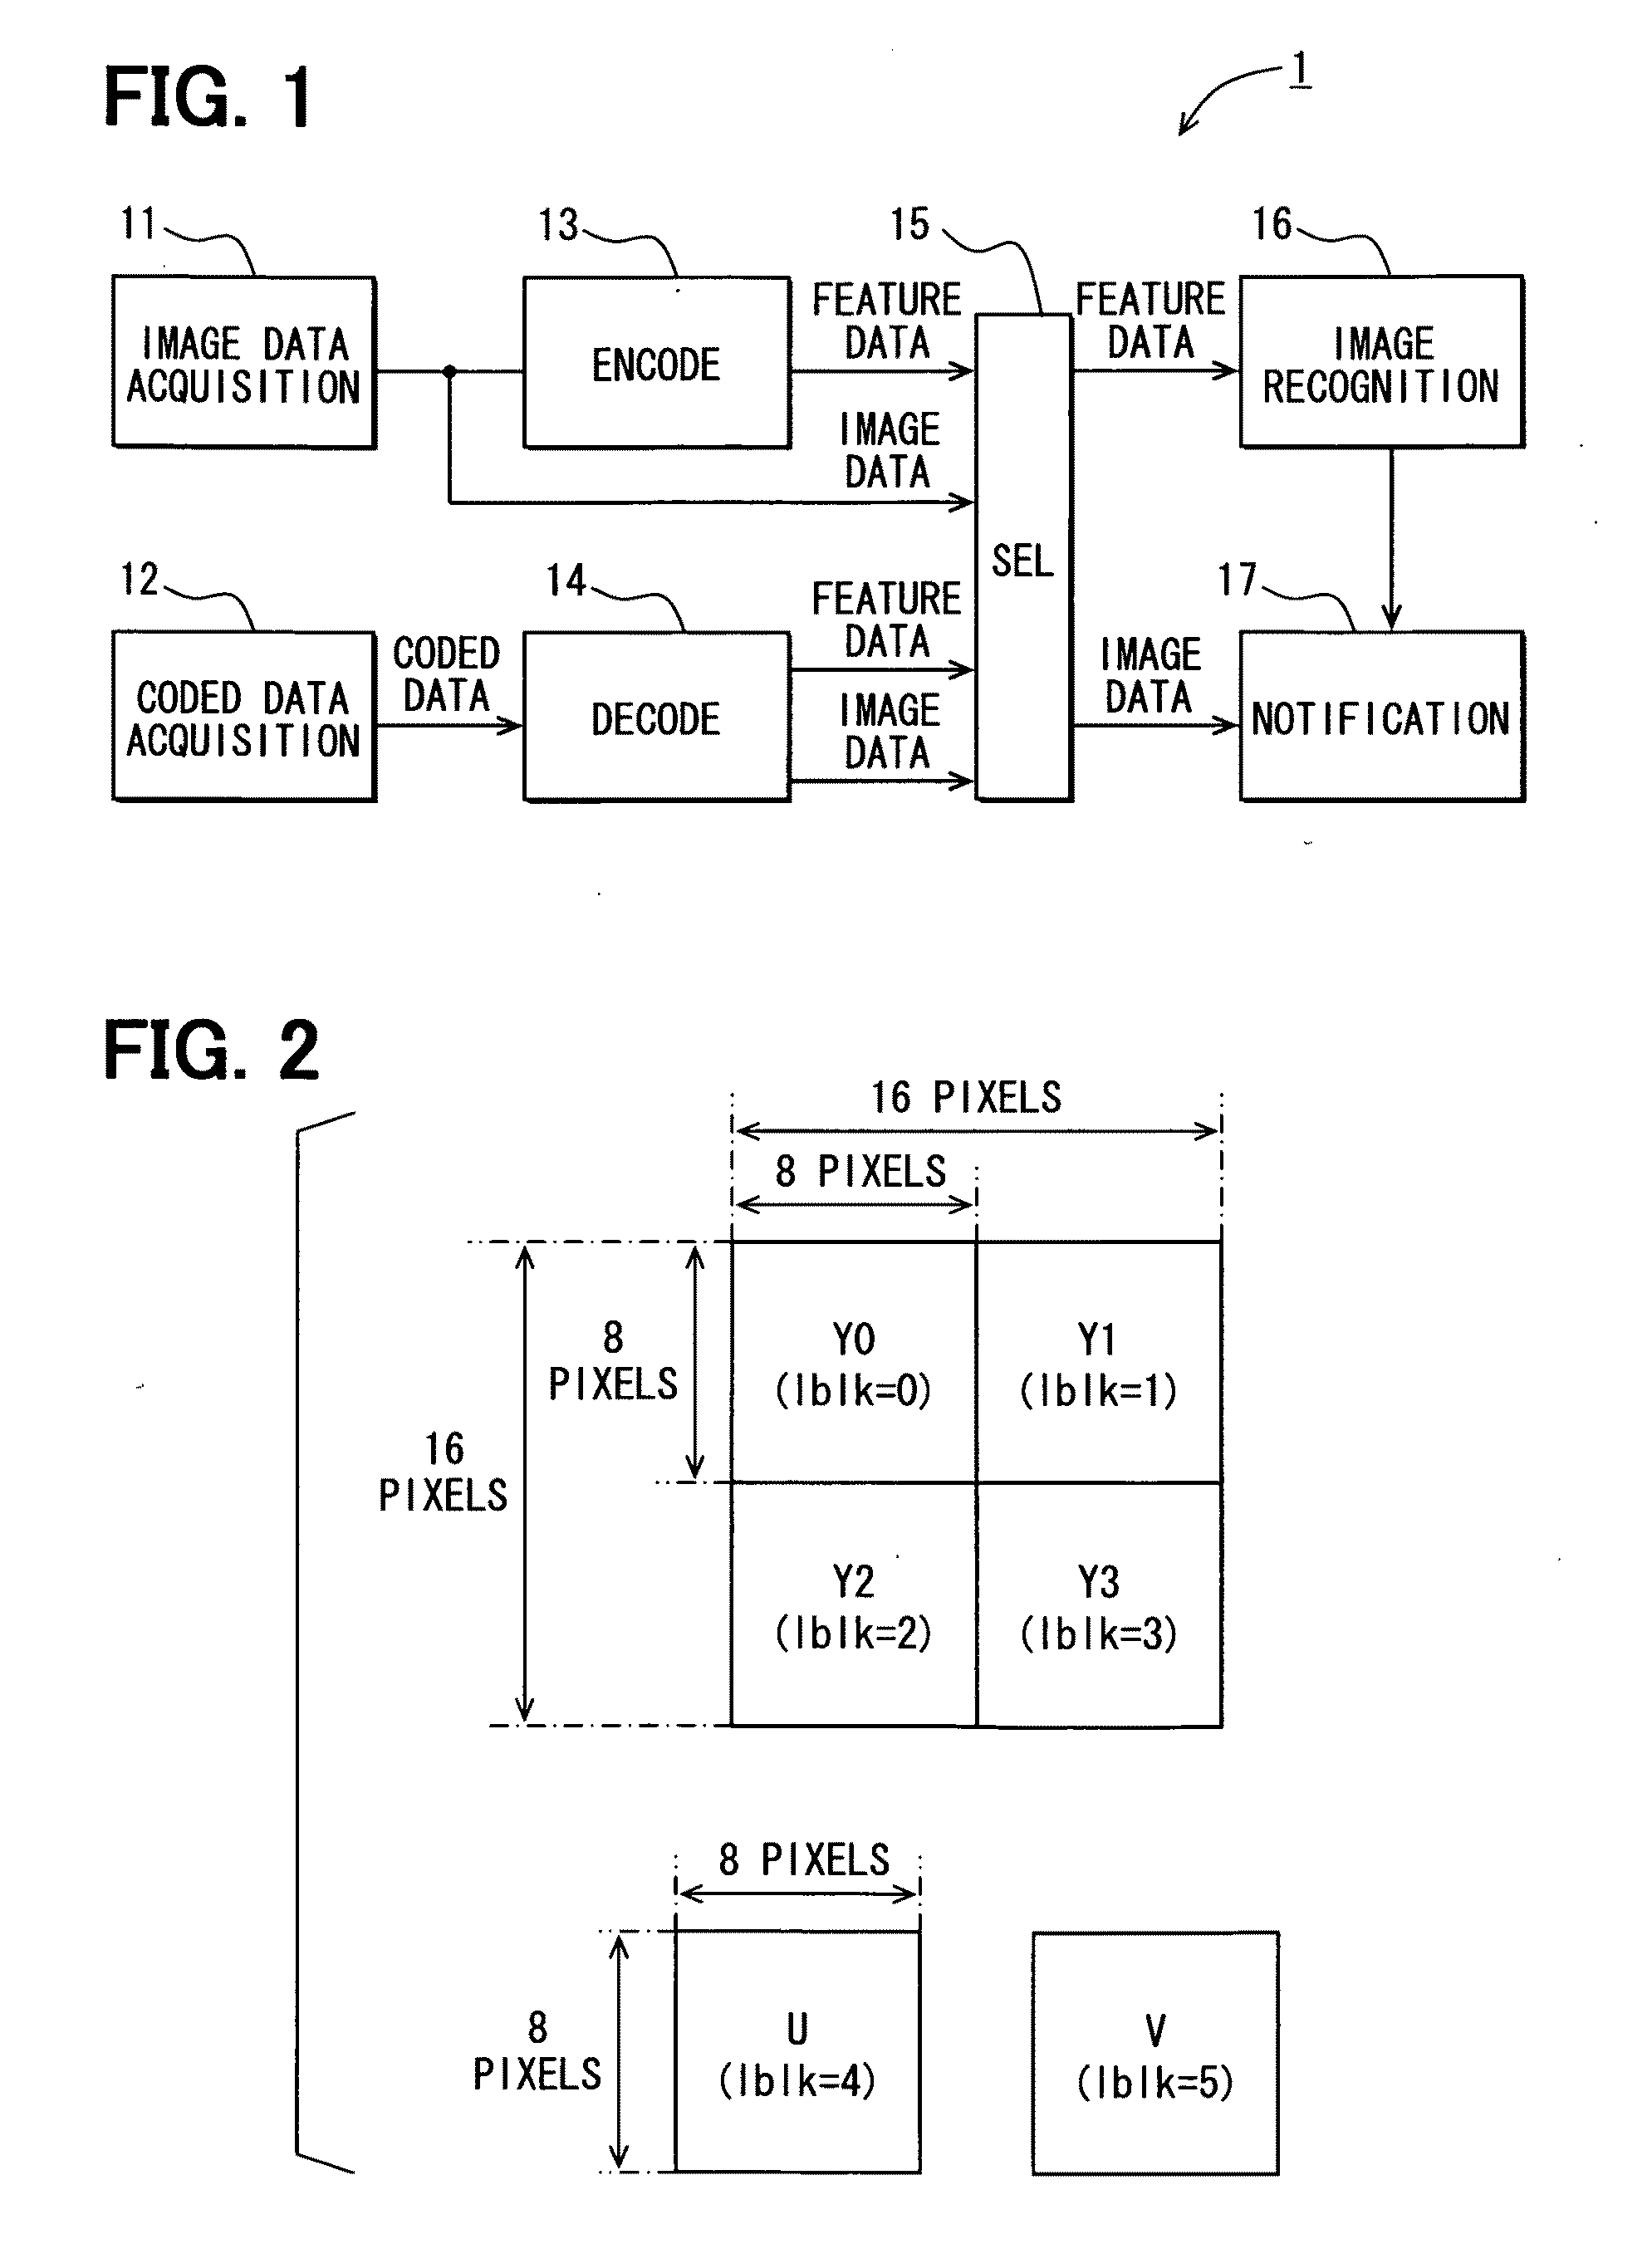 Apparatus for image recognition